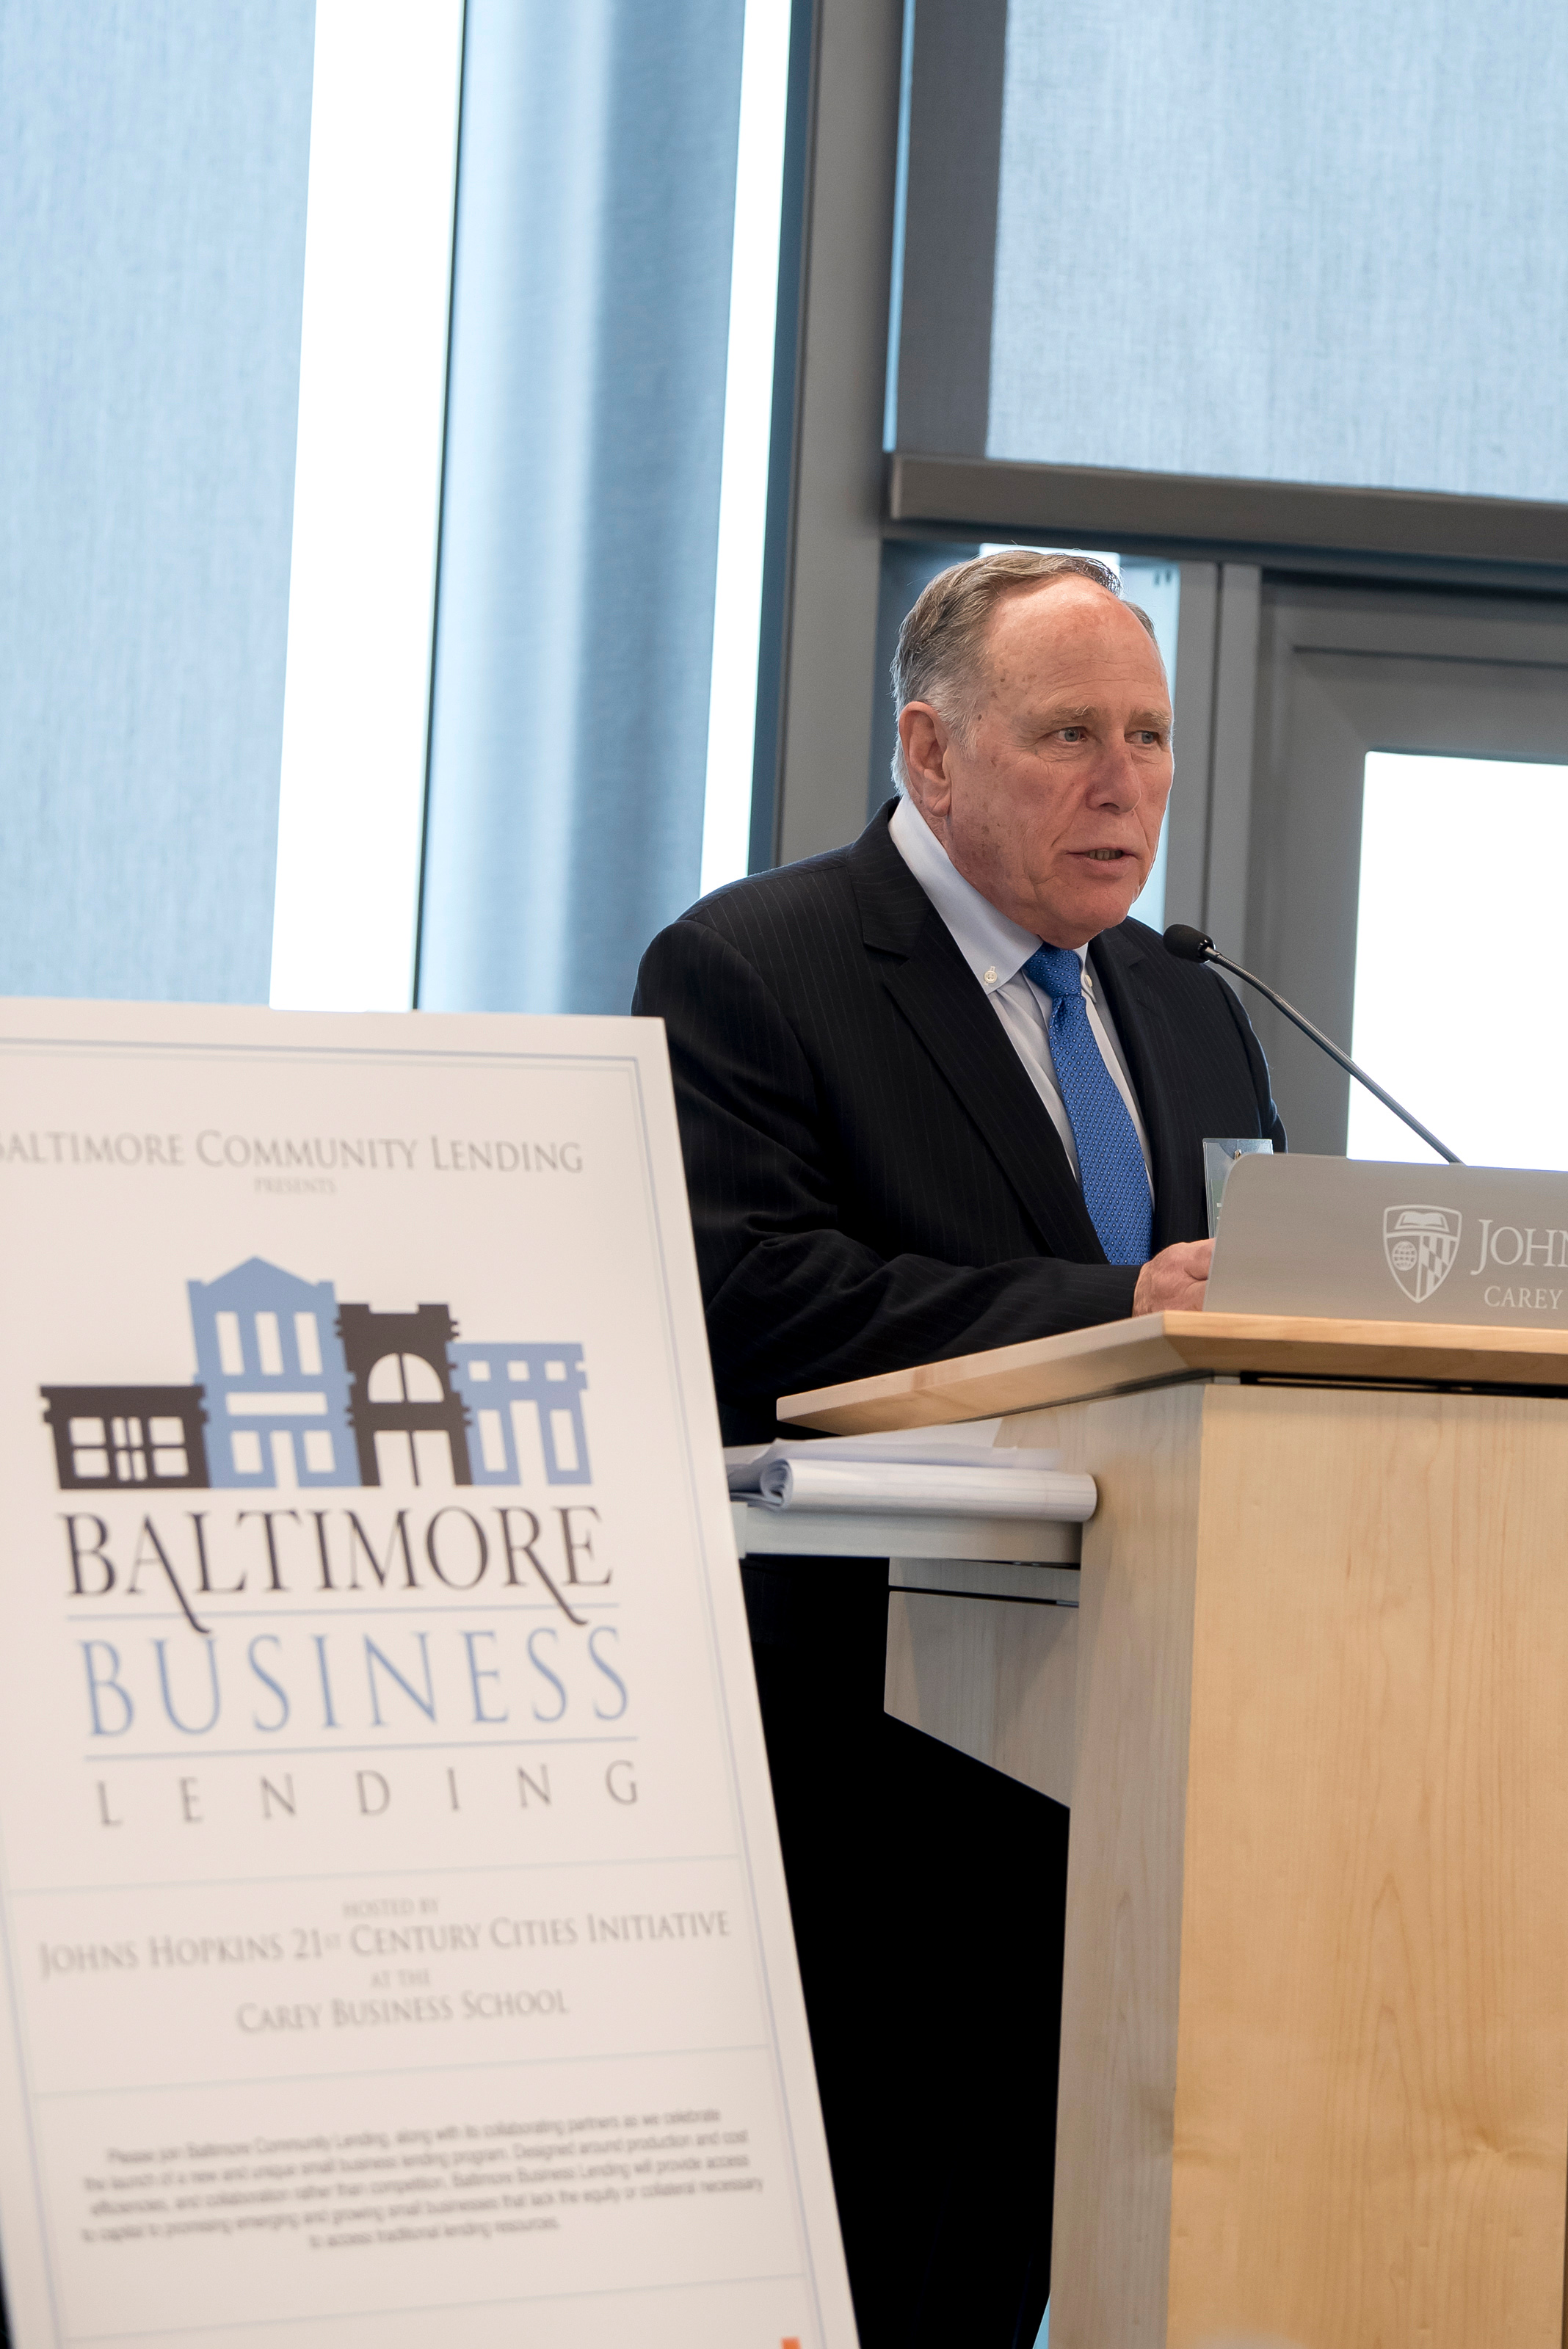 Bill Ariano announces the launch of Baltimore Business Lending